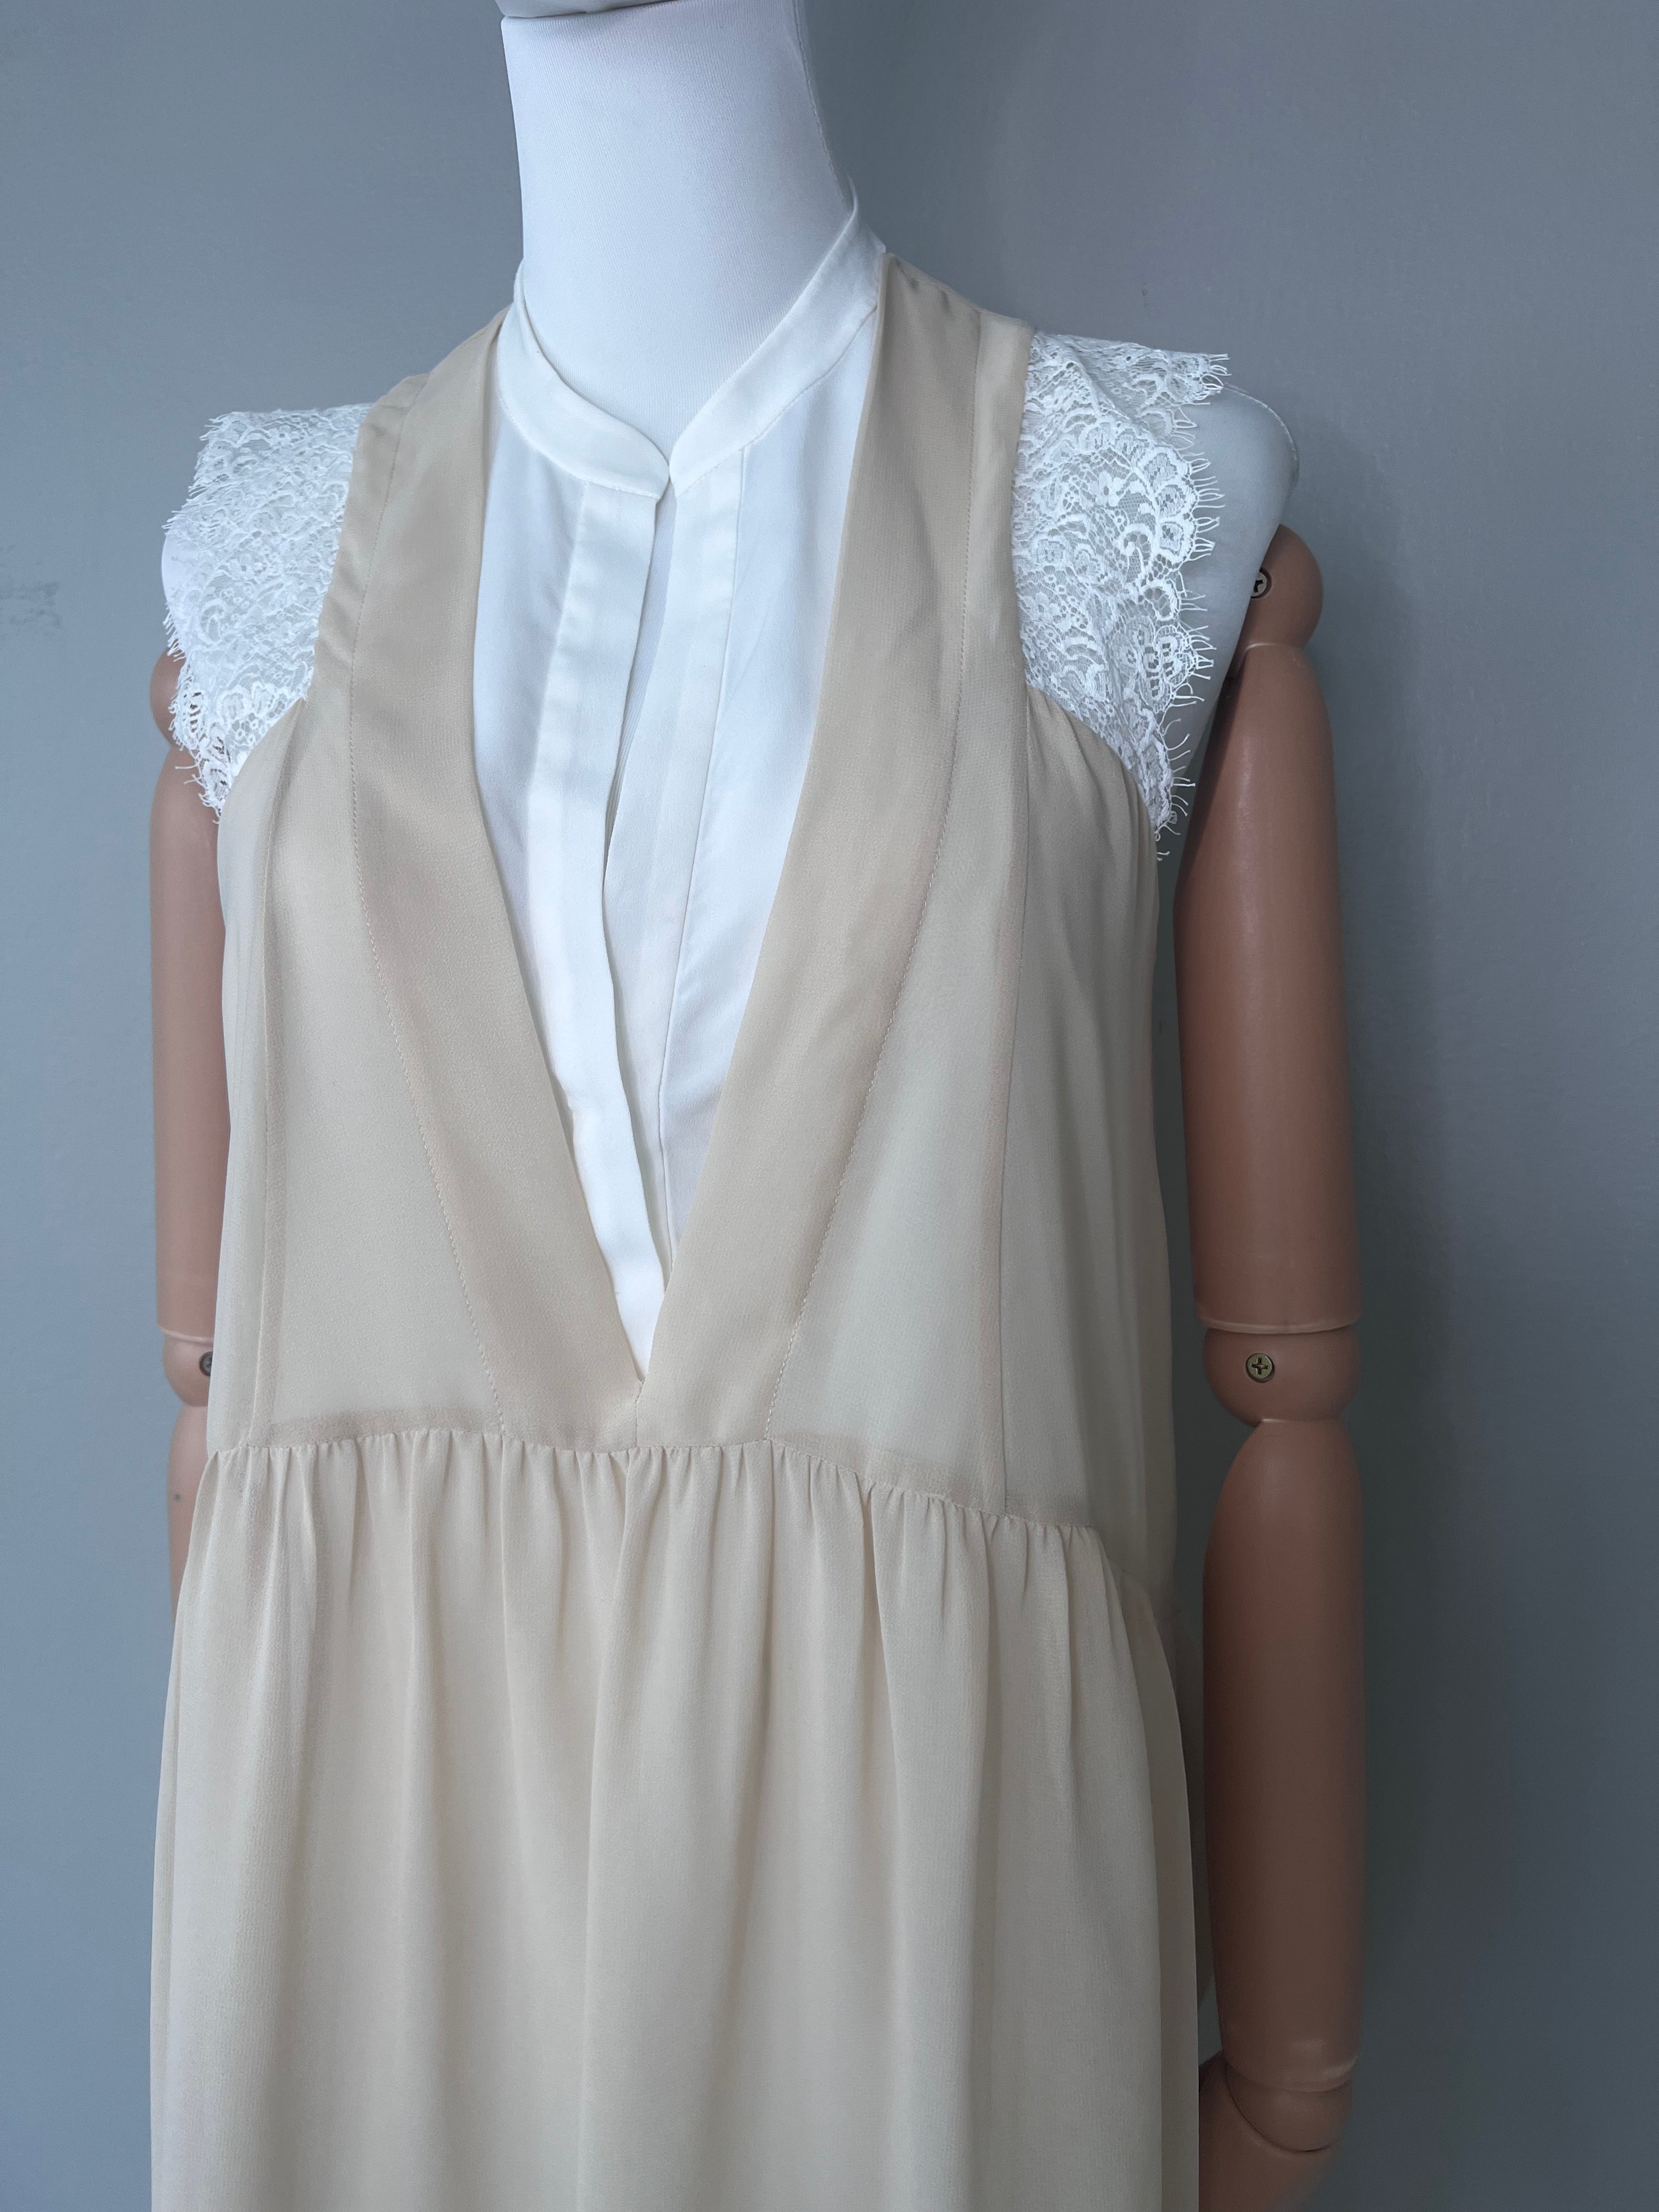 Cream dress with white collar and lace shoulders - SANDRO